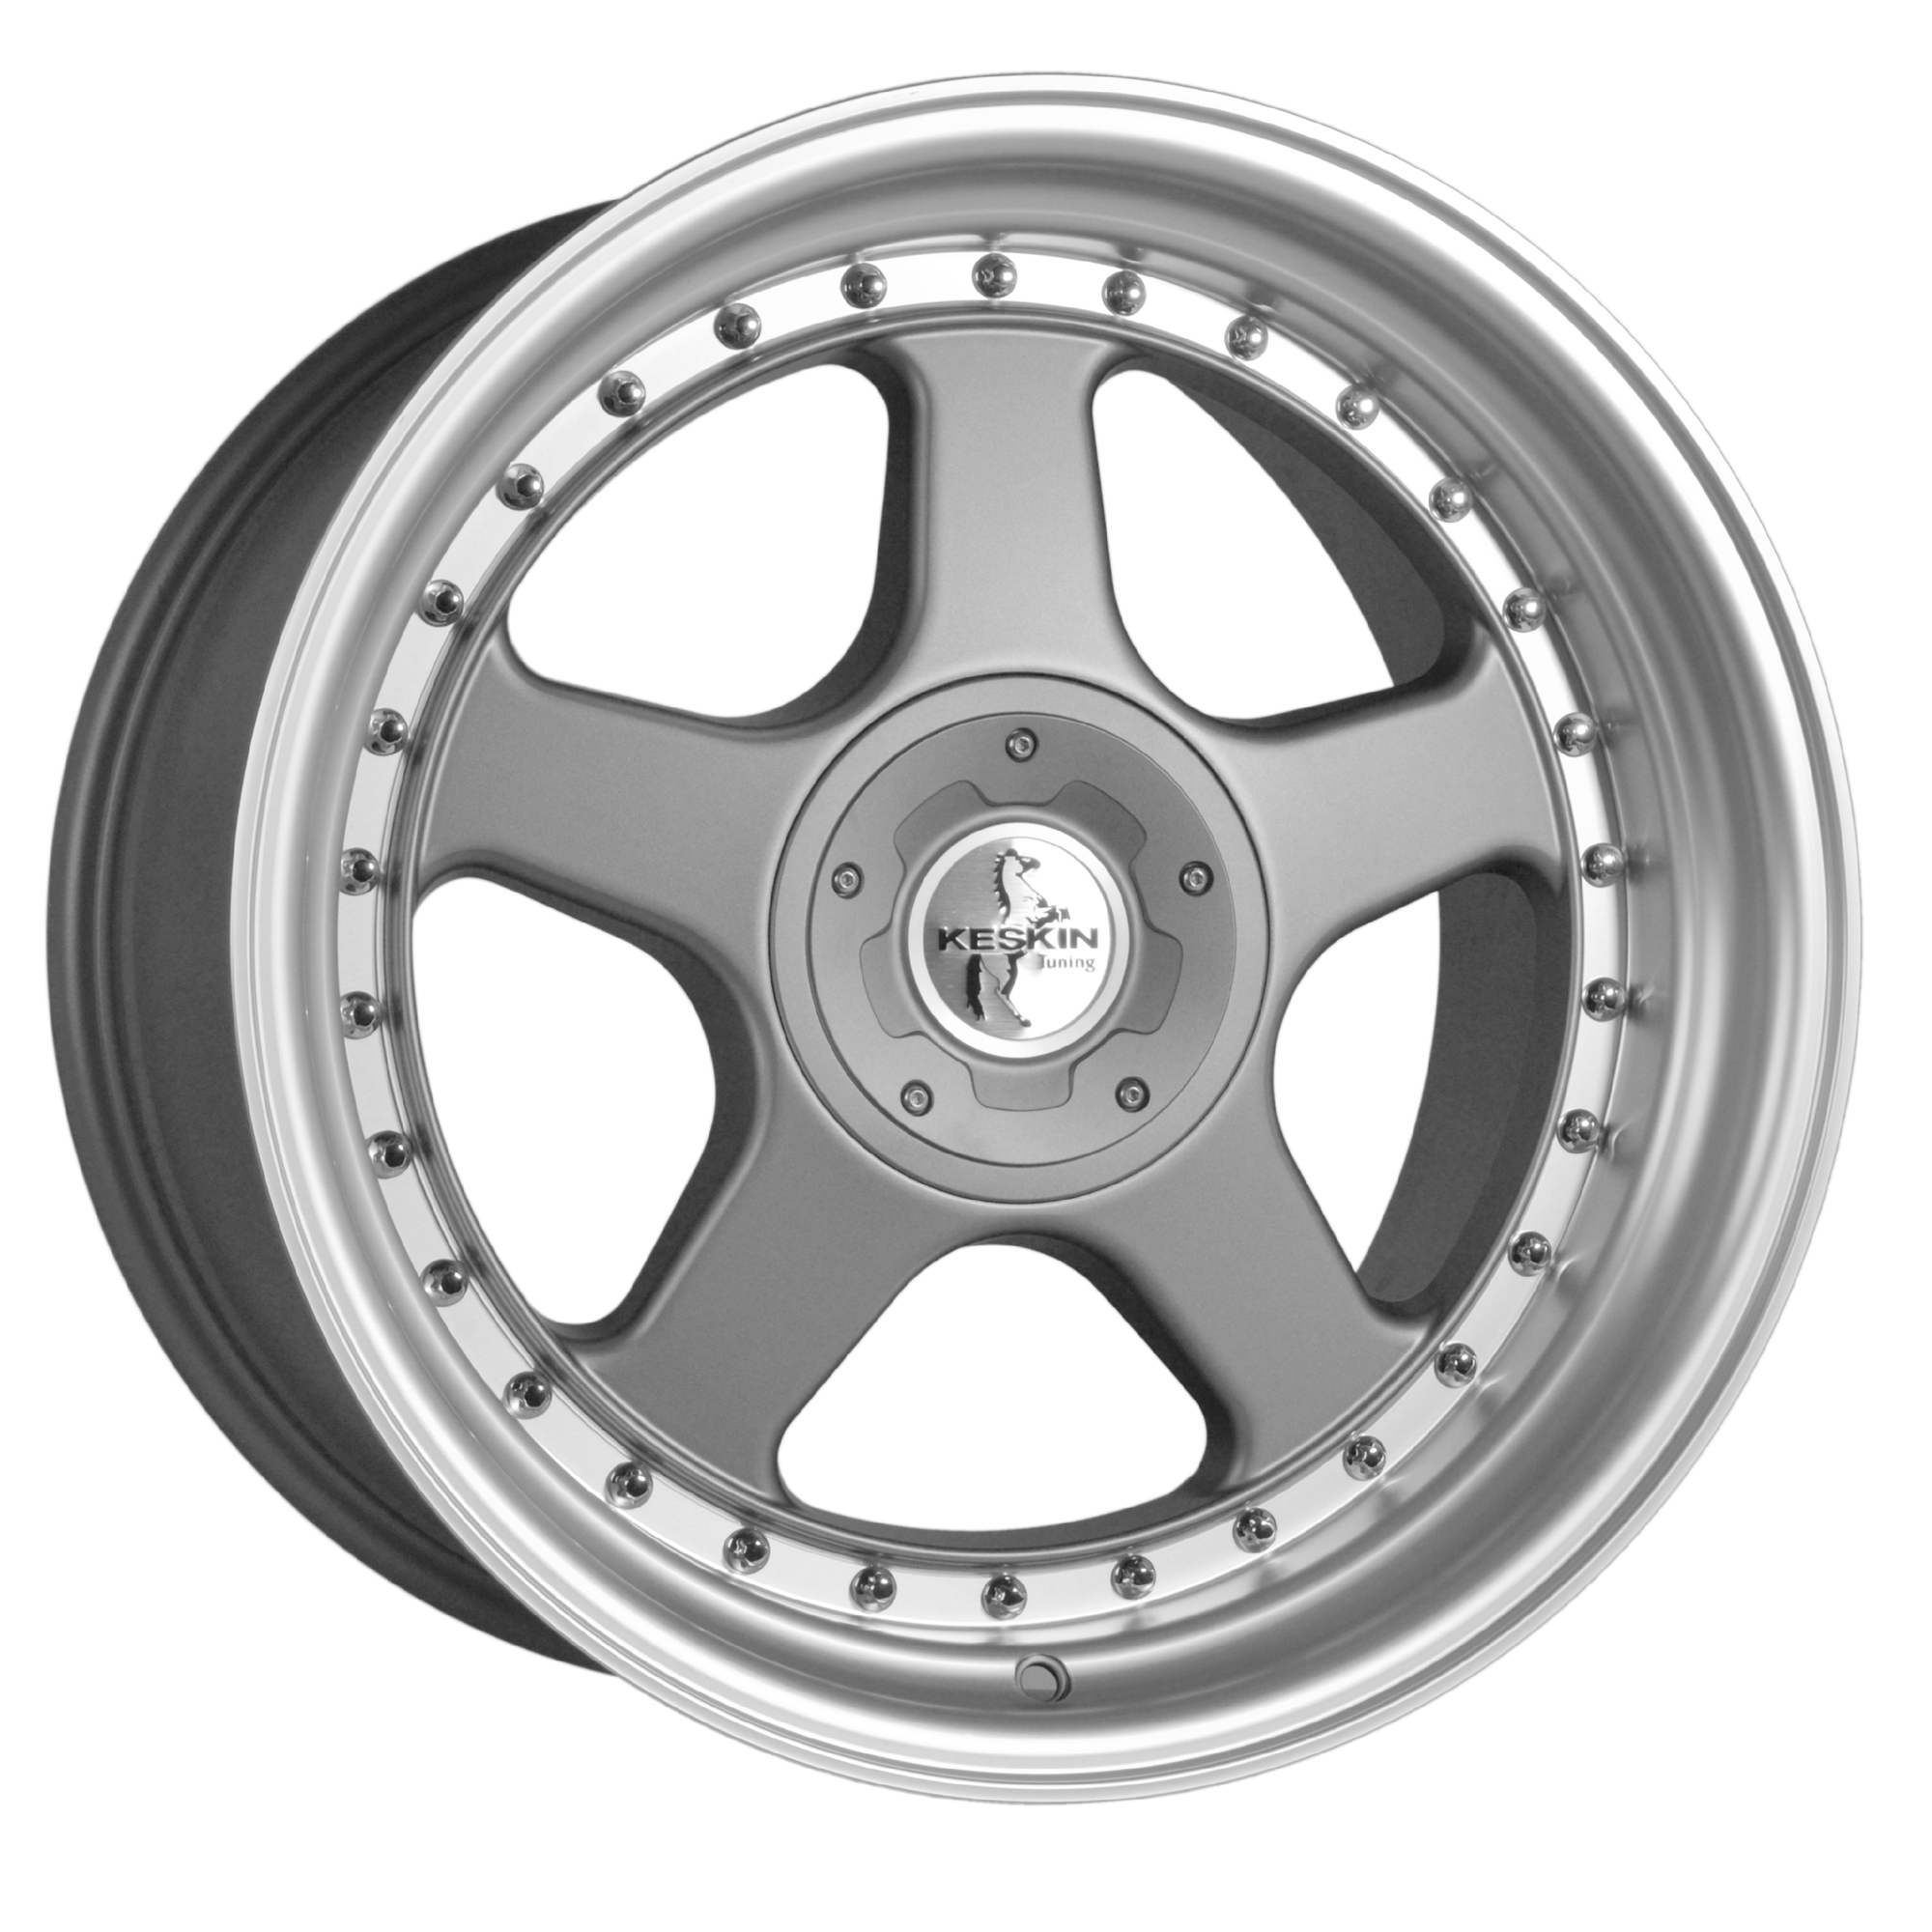 https://spectrumautostyling.com/images/wheels-placeholder.png